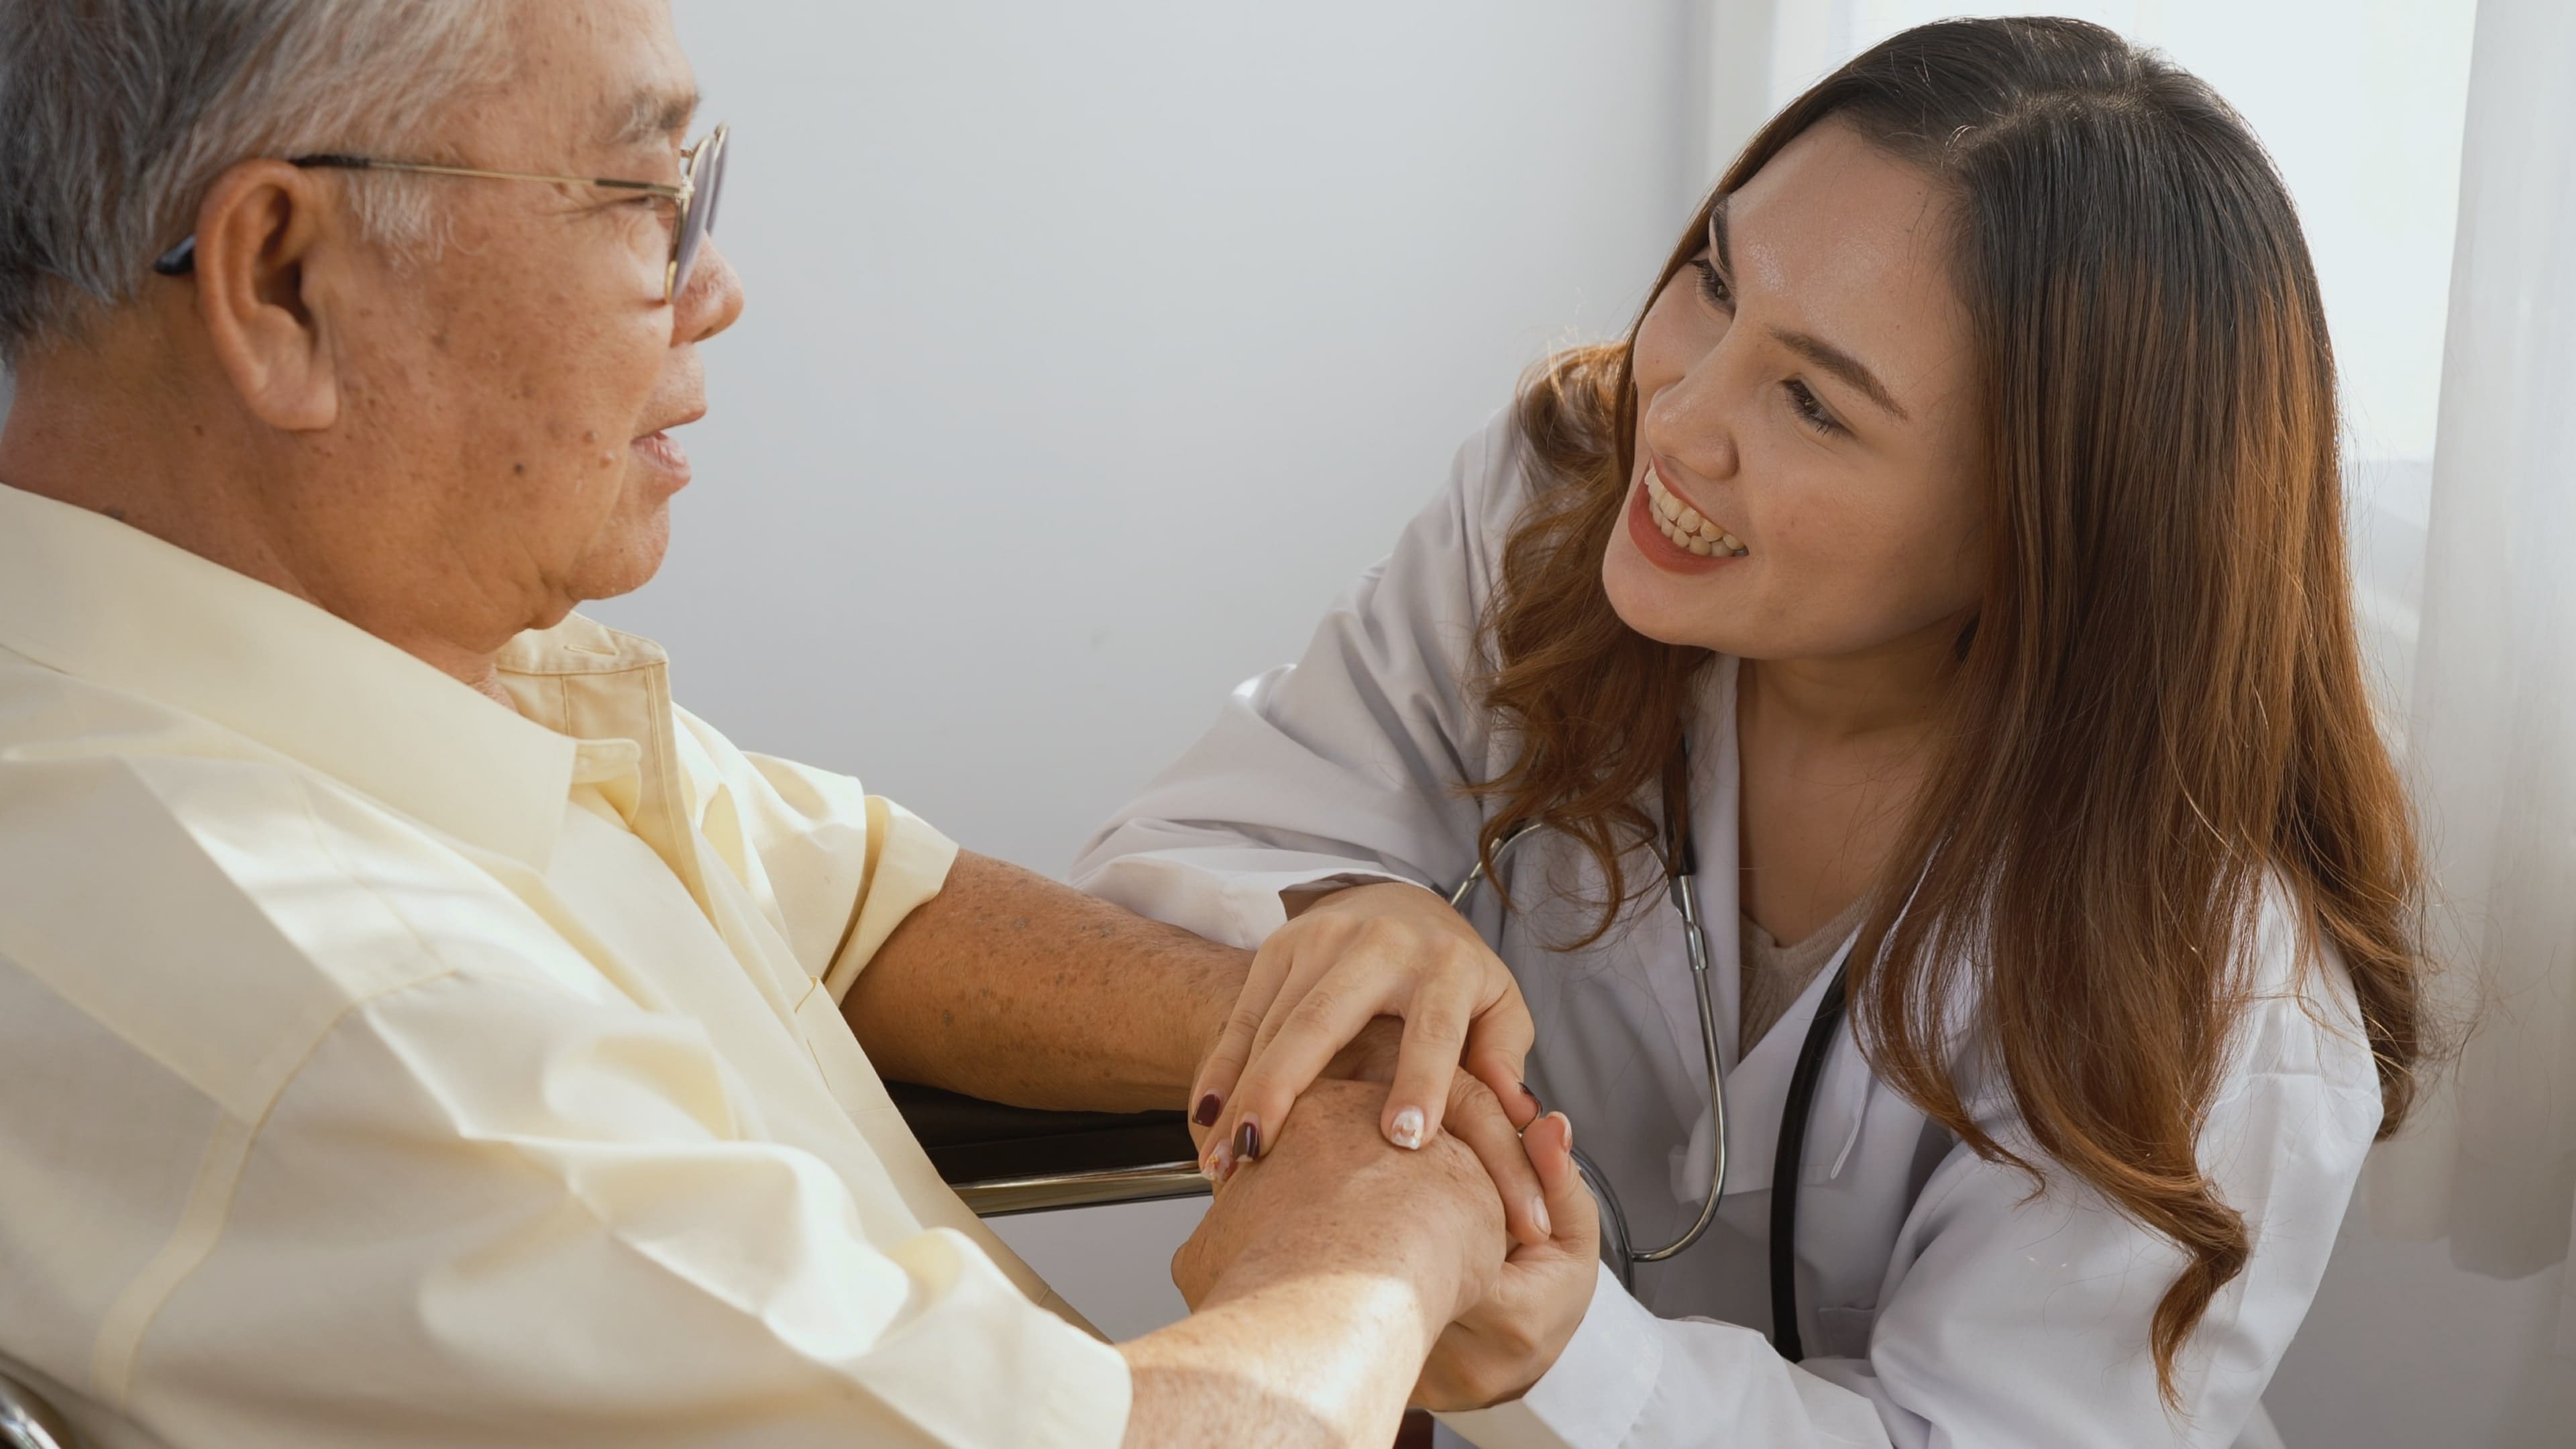 A professional caregiver talking with an older adult